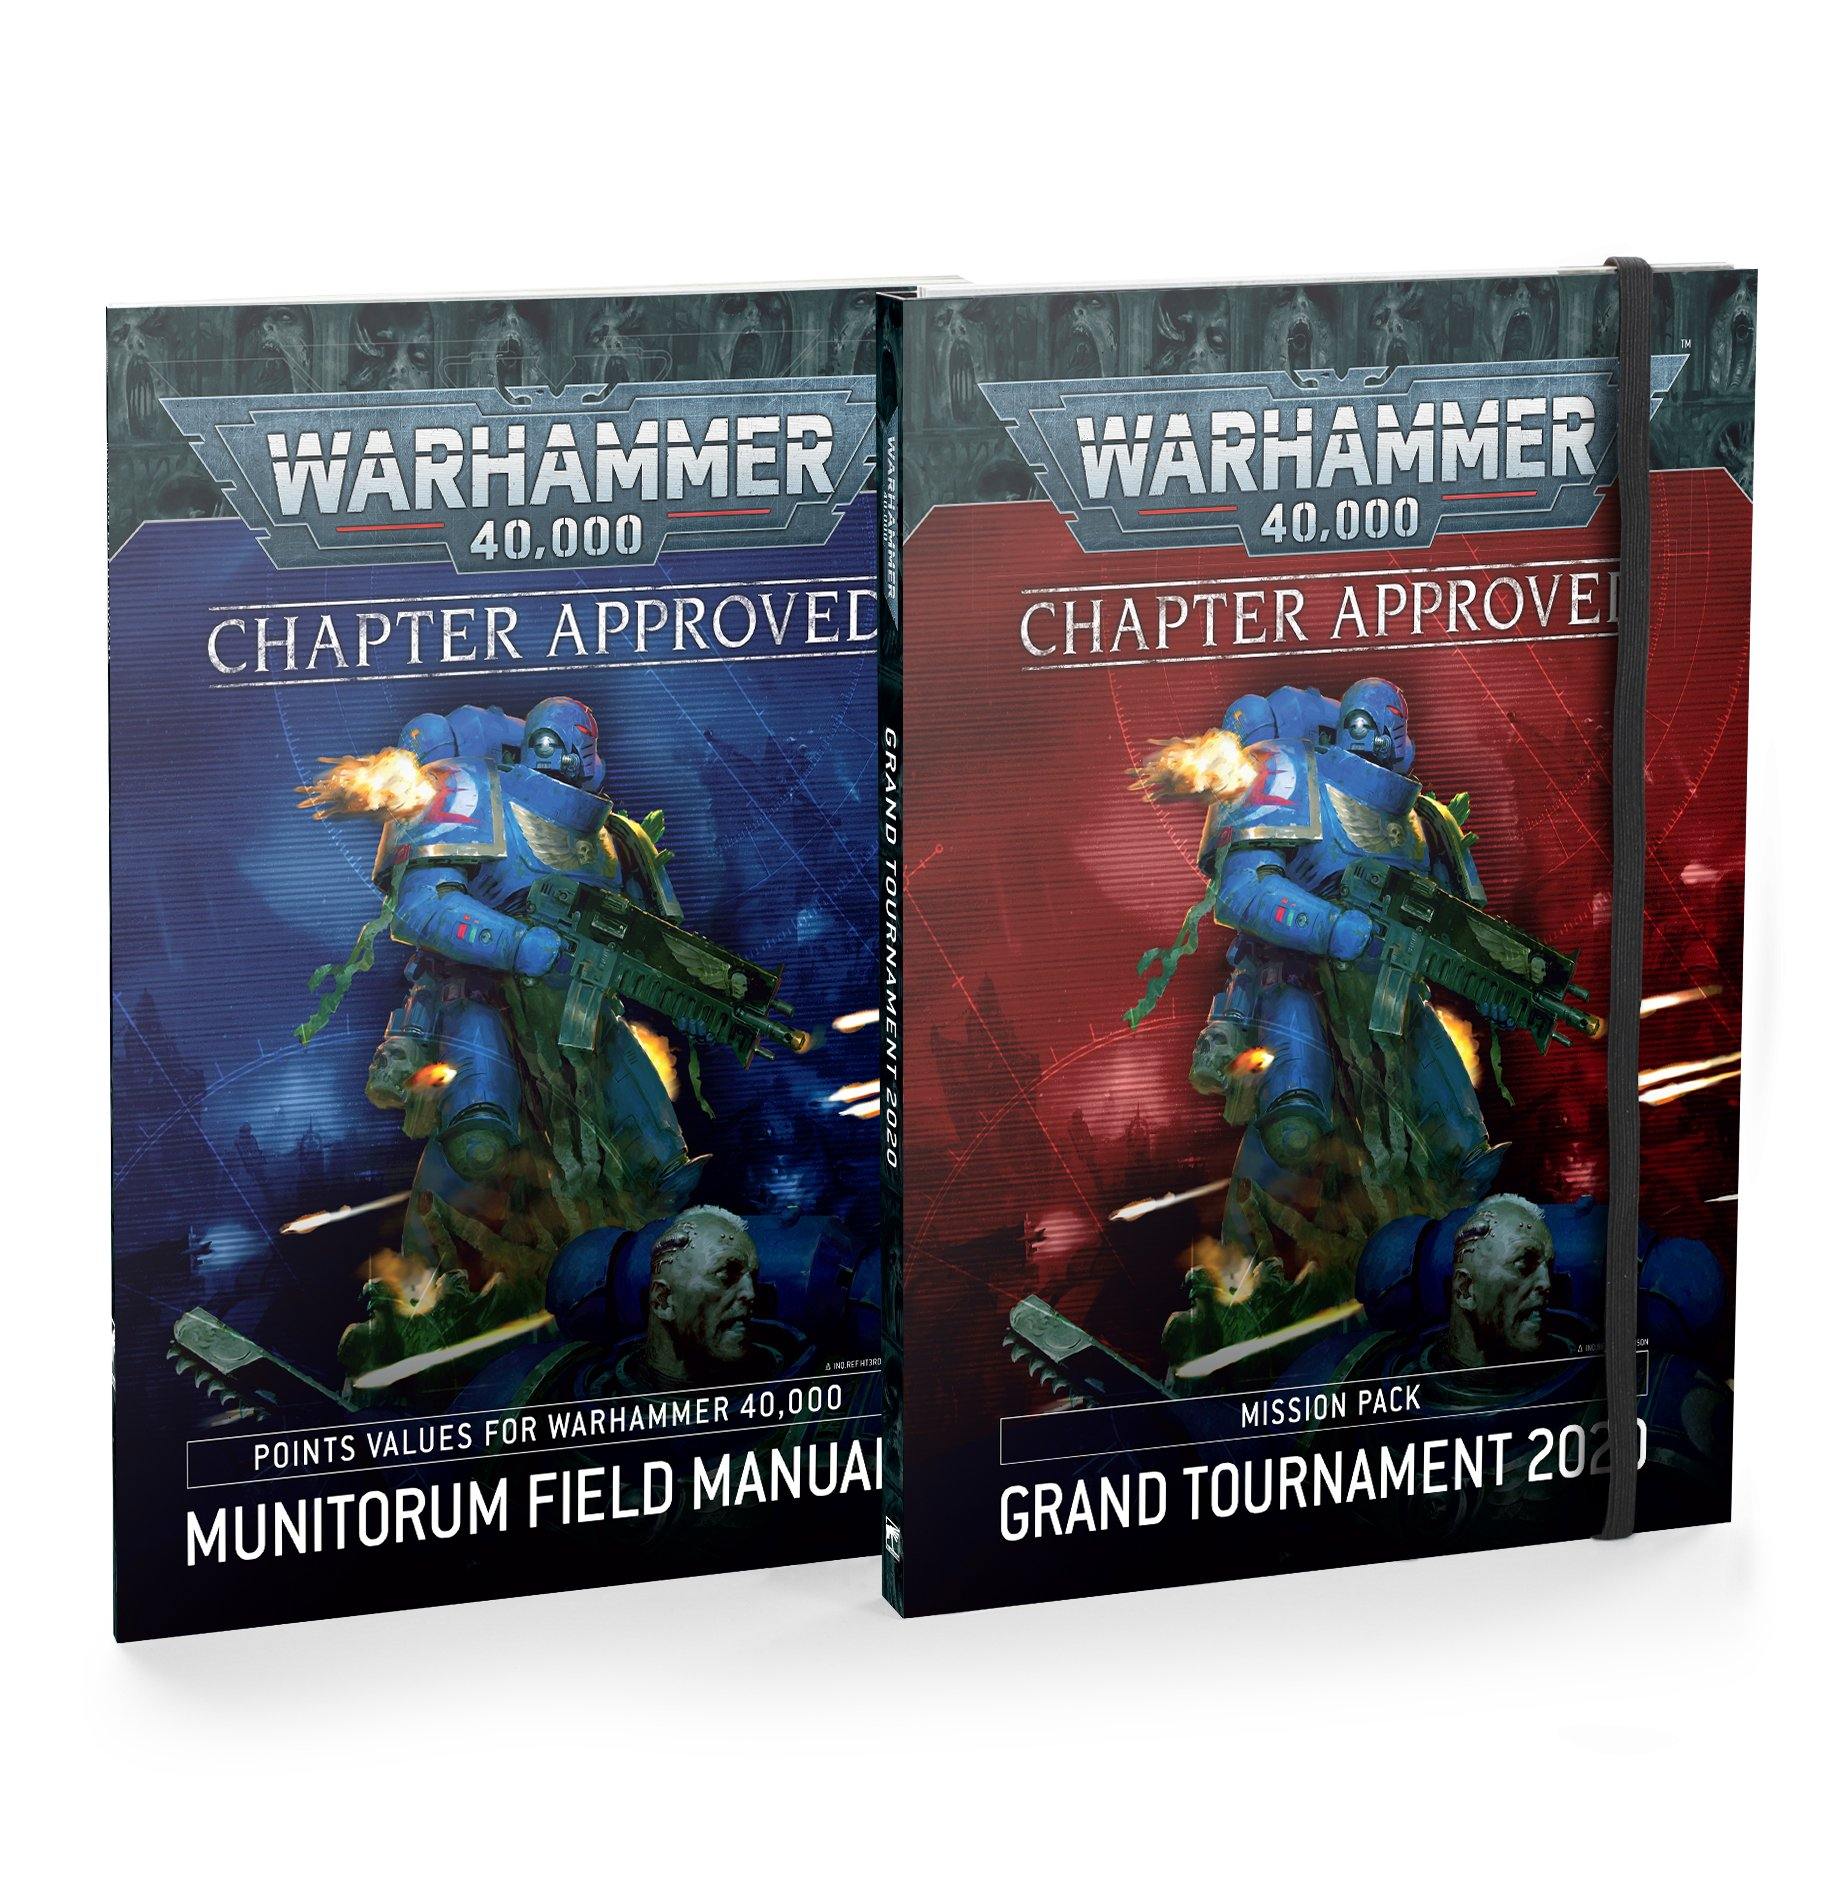 WH40K: CHAPTER APPROVED 2020 GRADN TOURNAMENT - Vaper Aid